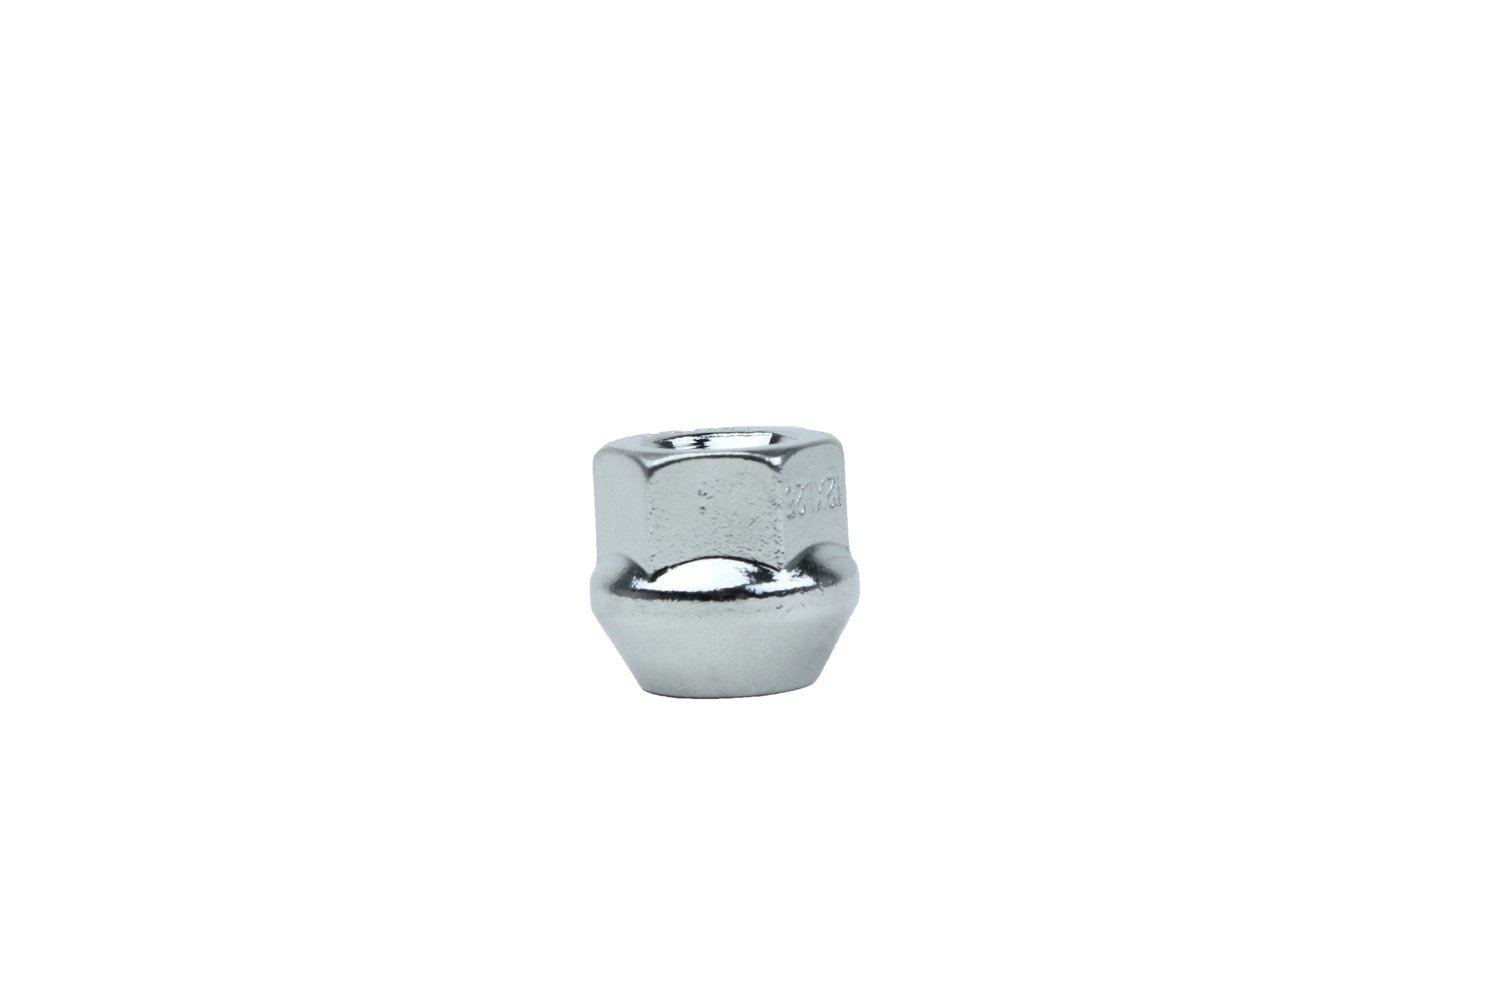 25mm ISC Spacer/Adapter lug nut